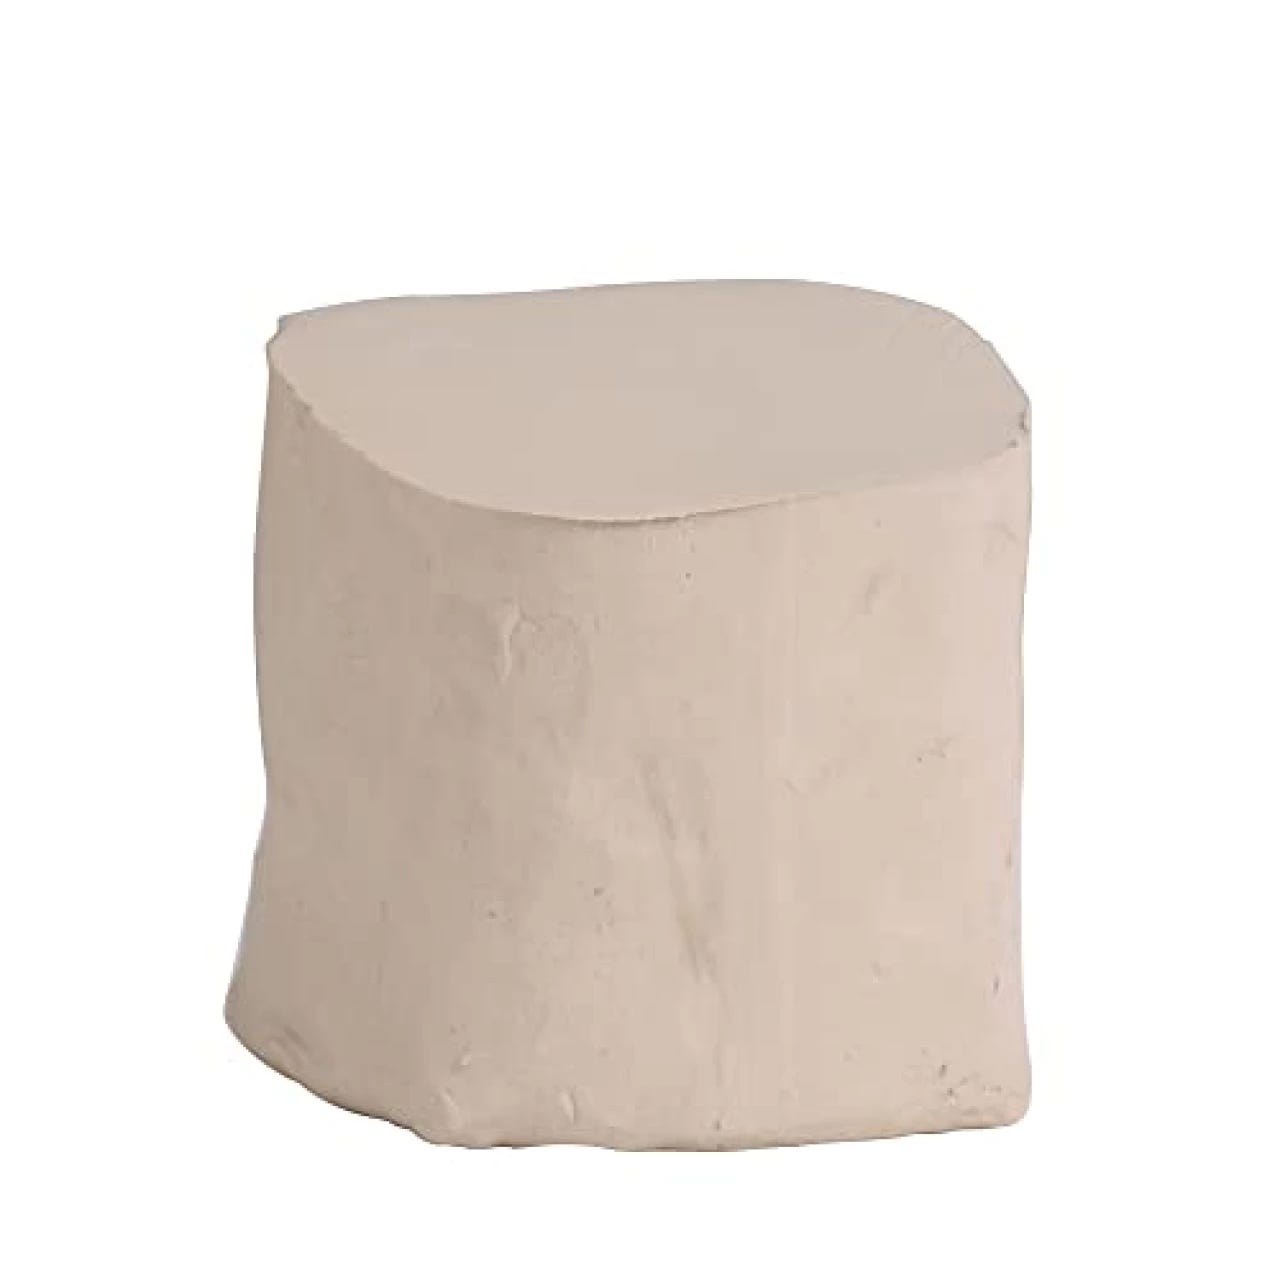  Old Potters Mid High Fire White Stoneware Clay for Pottery, Cone 5-10, Ideal for Wheel Throwing, Hand Building, Sculpting, Great for  All Skill Levels